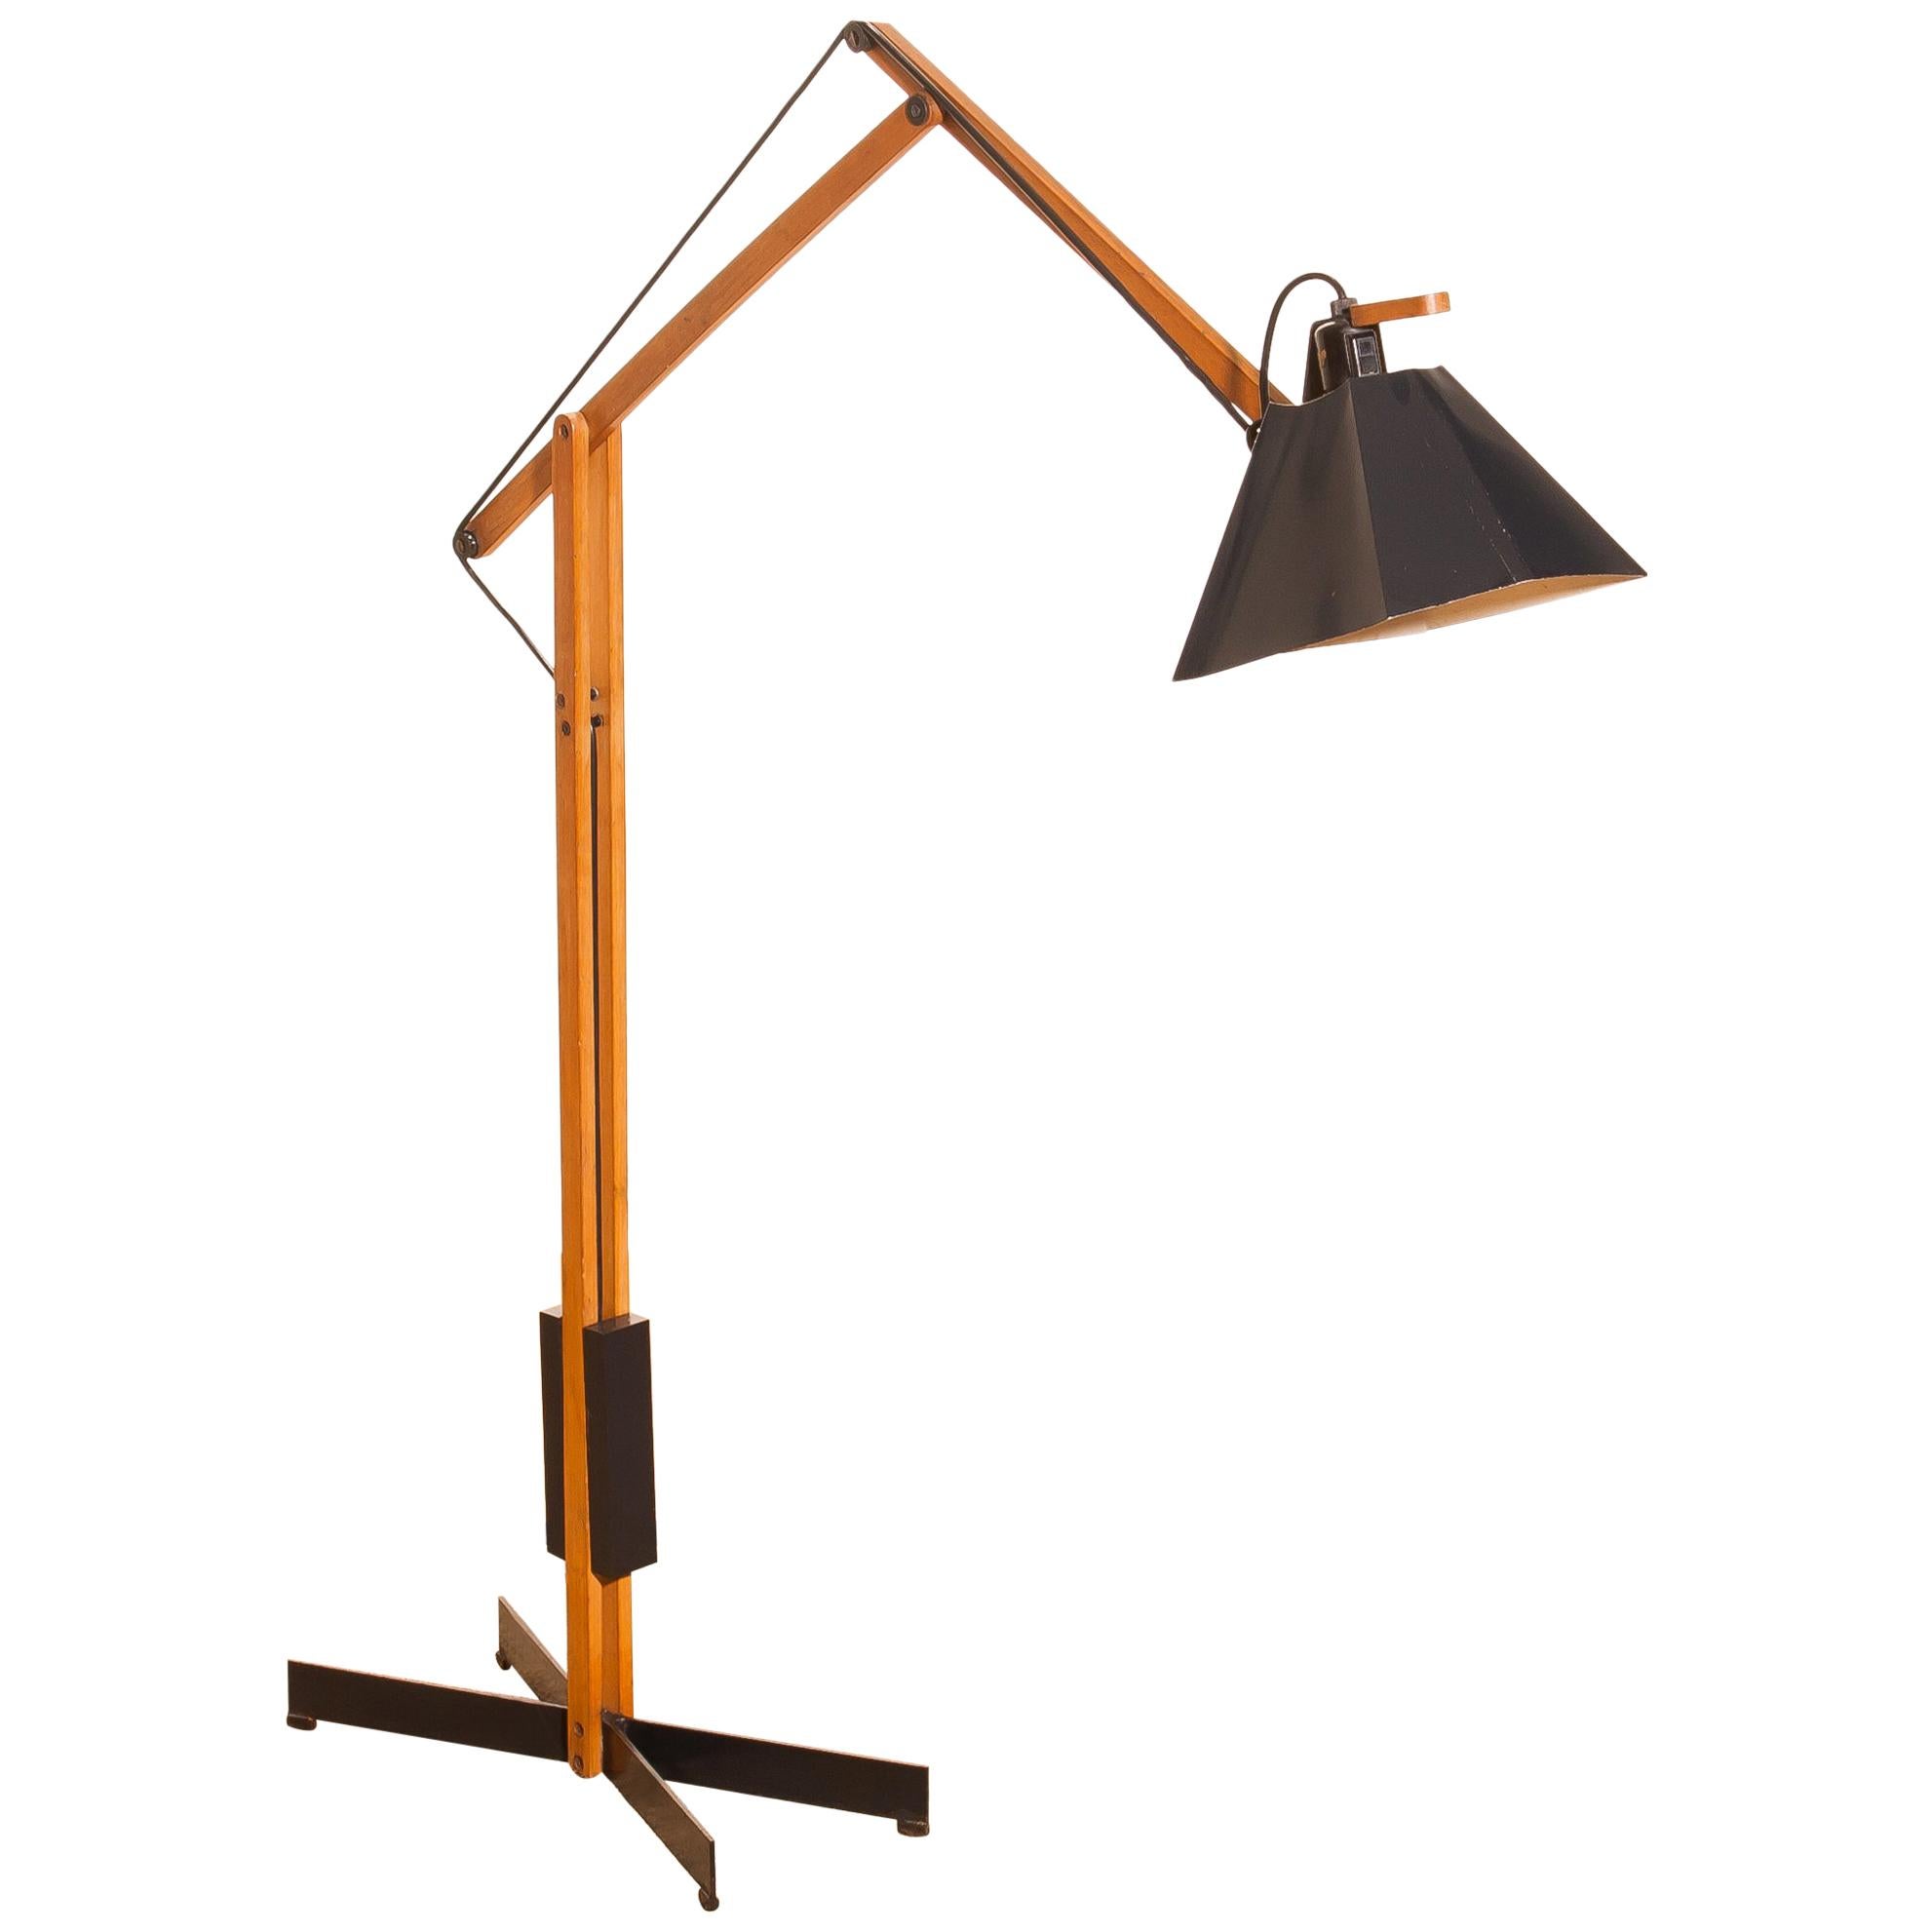 Magnificent rare floor lamp by Luxus, Sweden.
This lamp is adjustable by a counterbalance.
The Stand is made of teak with a black lacquered shade.
It is labelled by Luxus and in a beautiful condition,
circa 1950s.
Dimensions: H 125 cm, D 90 cm,